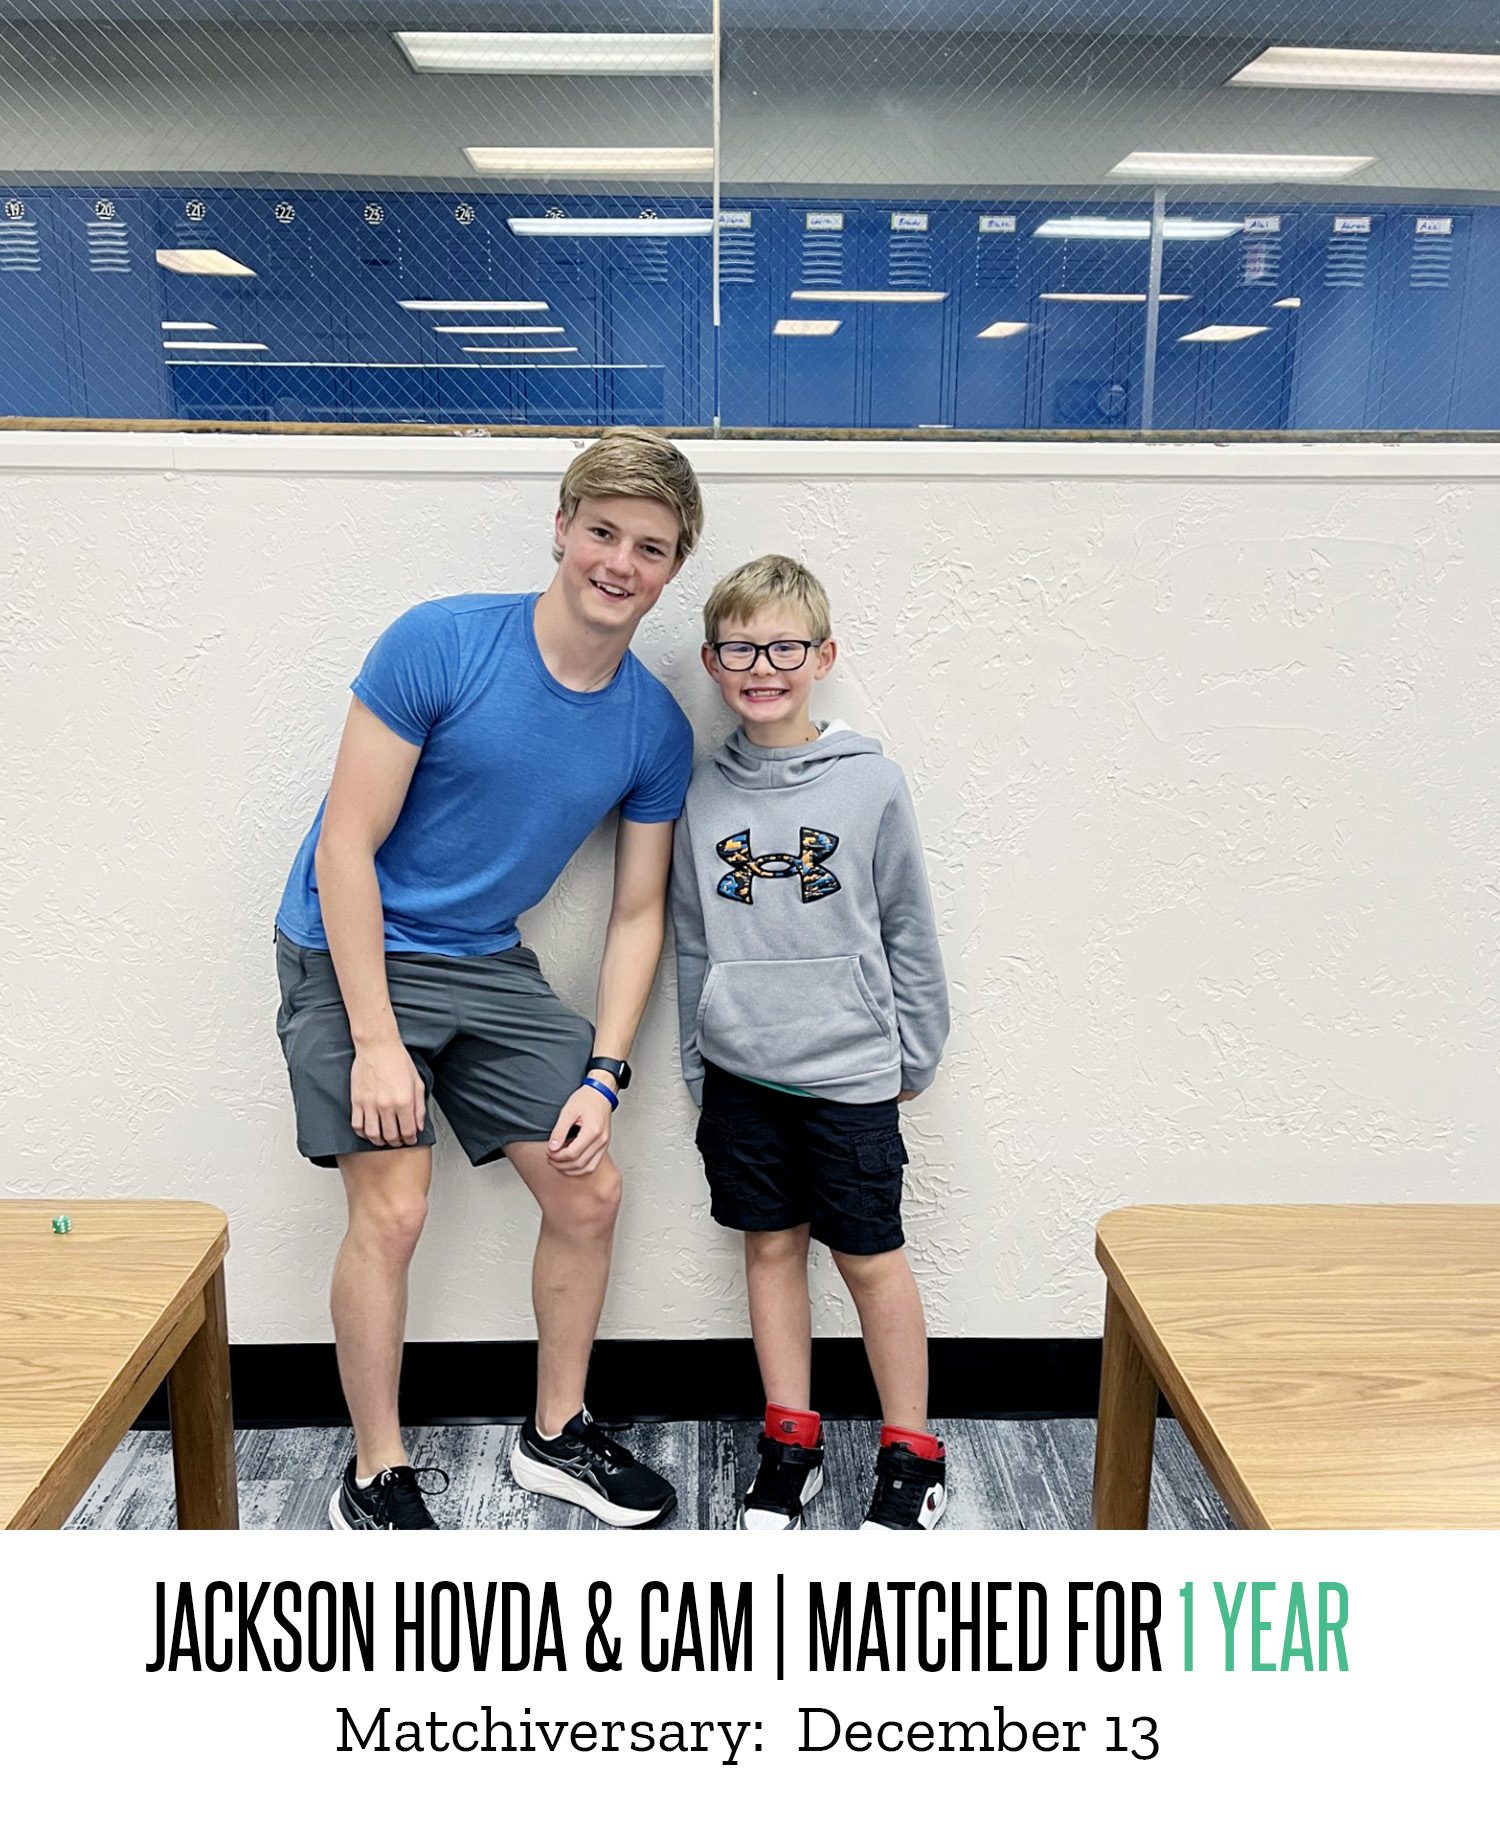 Jackson Hovda and Cam pose for a picture after being matched for one year